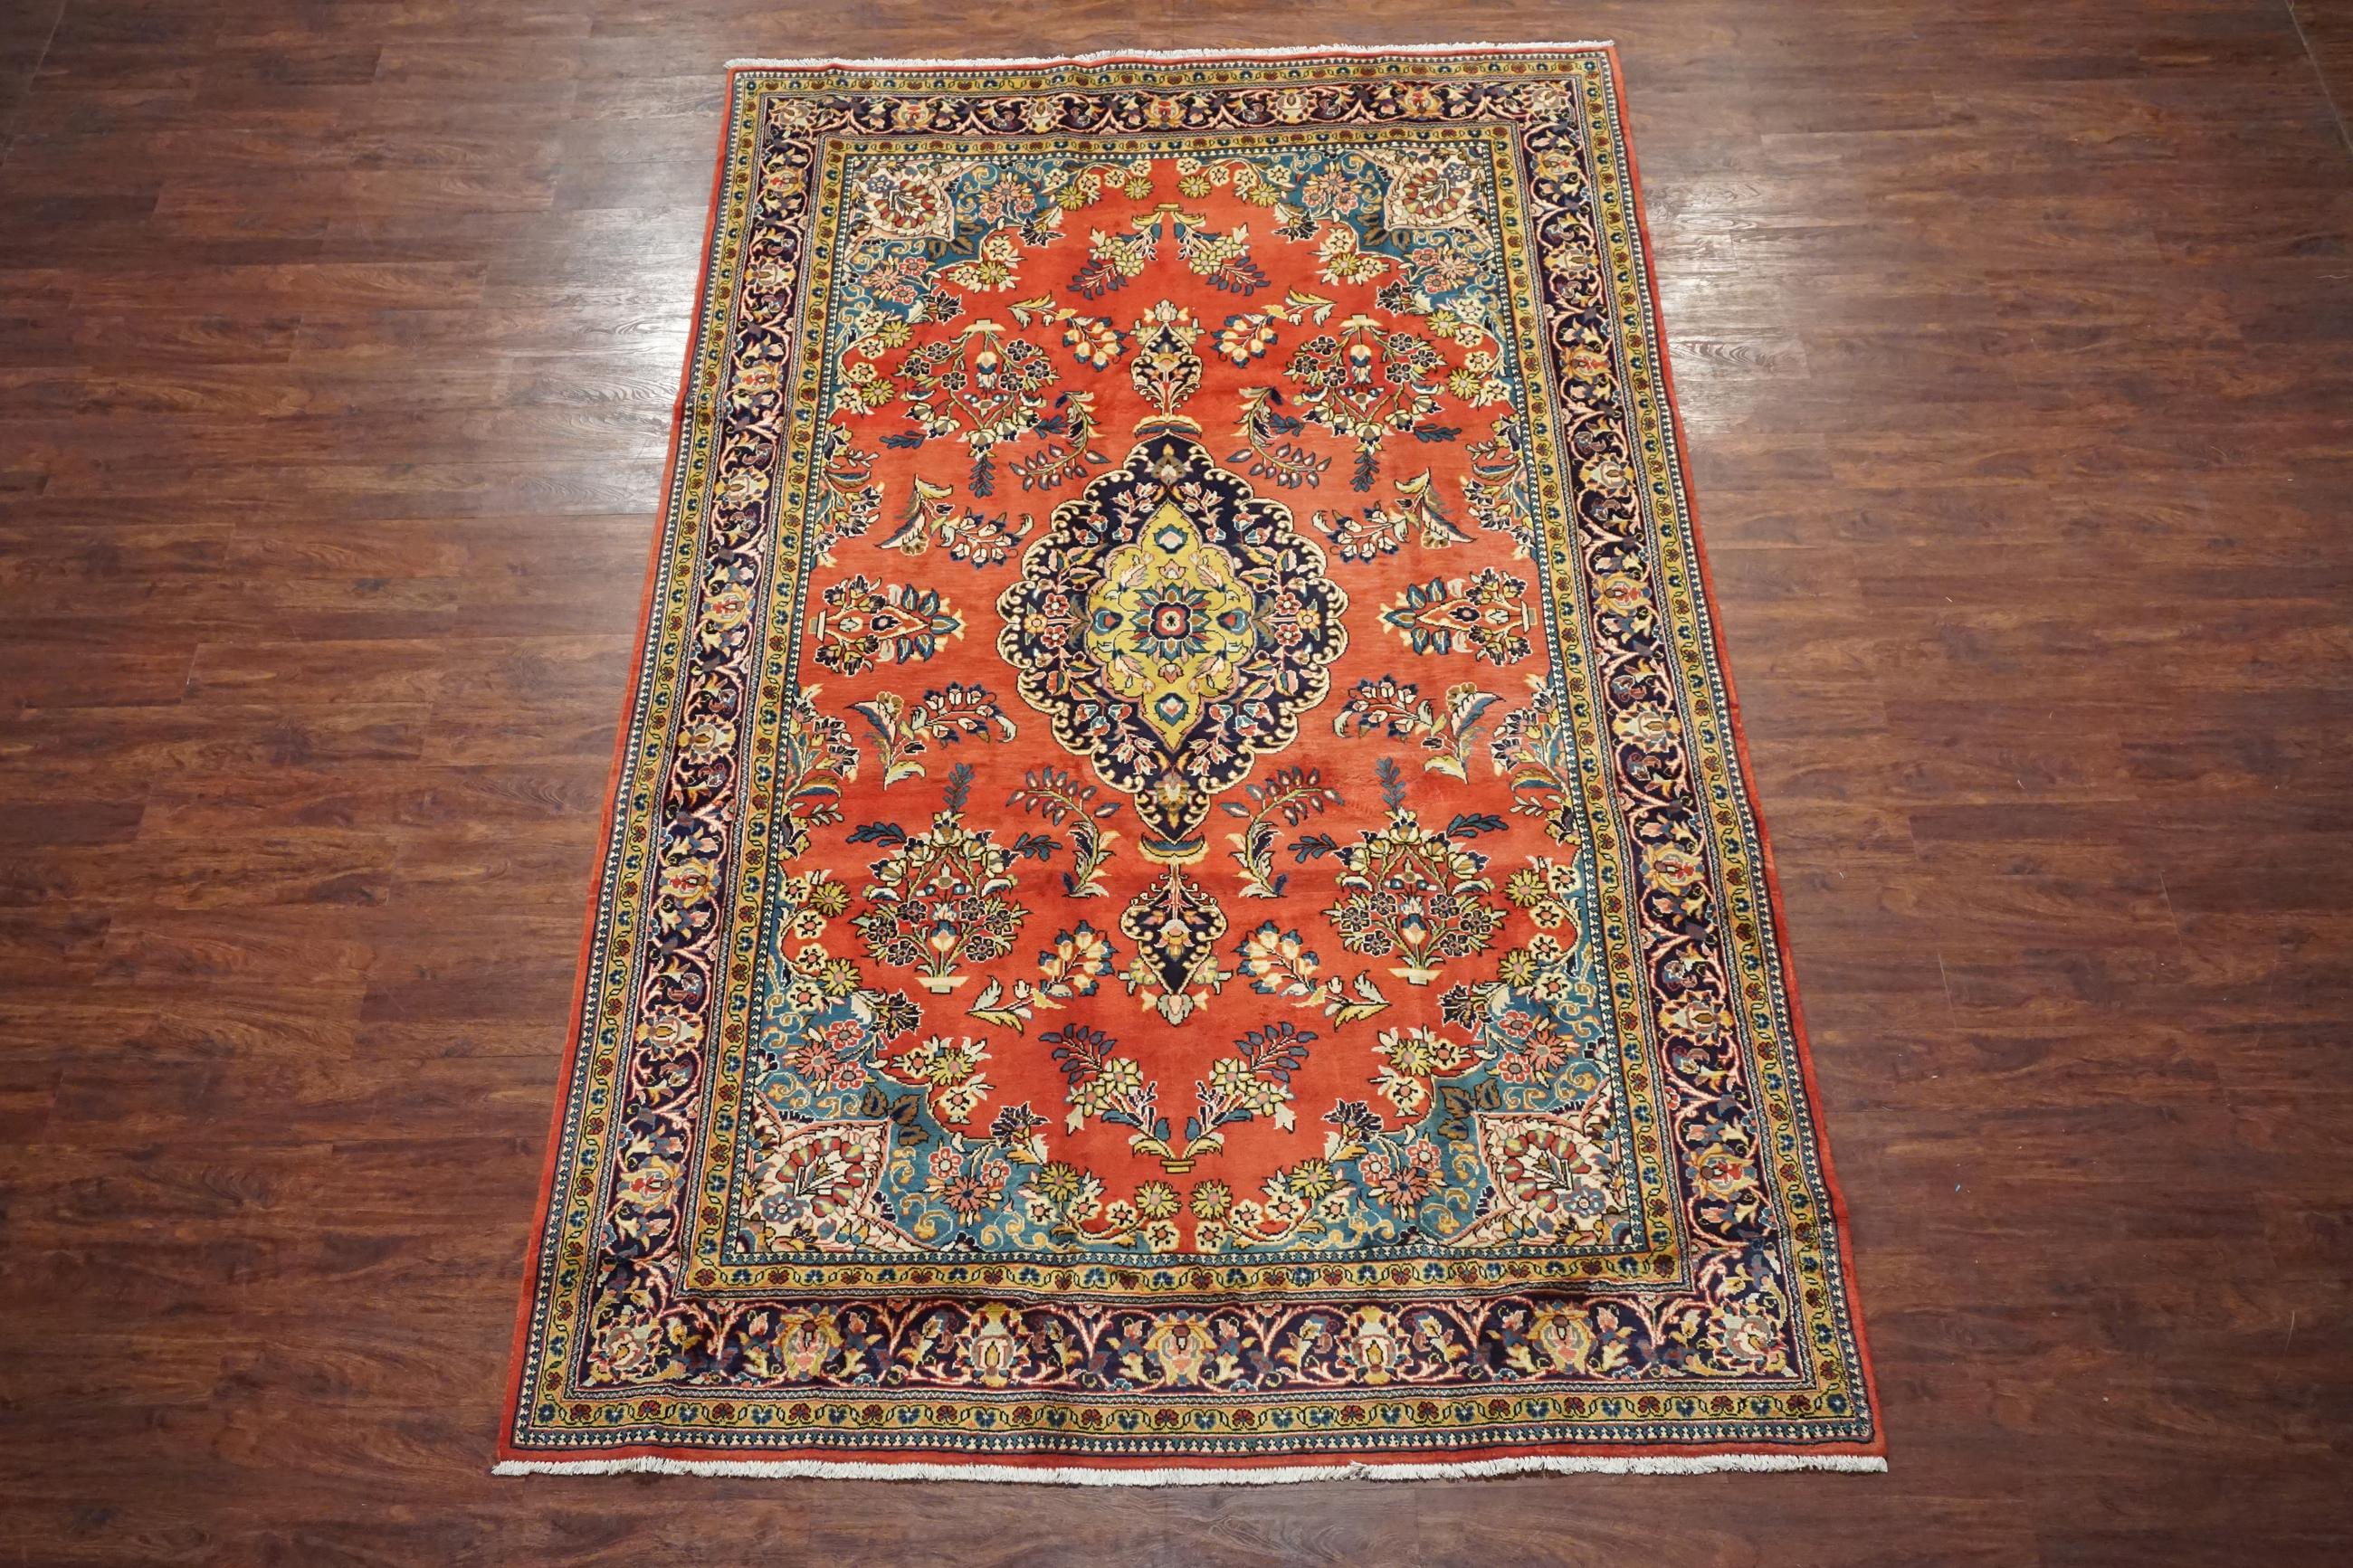 Hand-knotted wool pile on a cotton foundation.

Circa 1940

Dimensions: 7' x 11'

Condition: Excellent for its age

Origin: Iran

Field Color: Rust-Red

Border Color: Midnight-Blue

Accent Colors: Light-Blue, Gold, Ivory